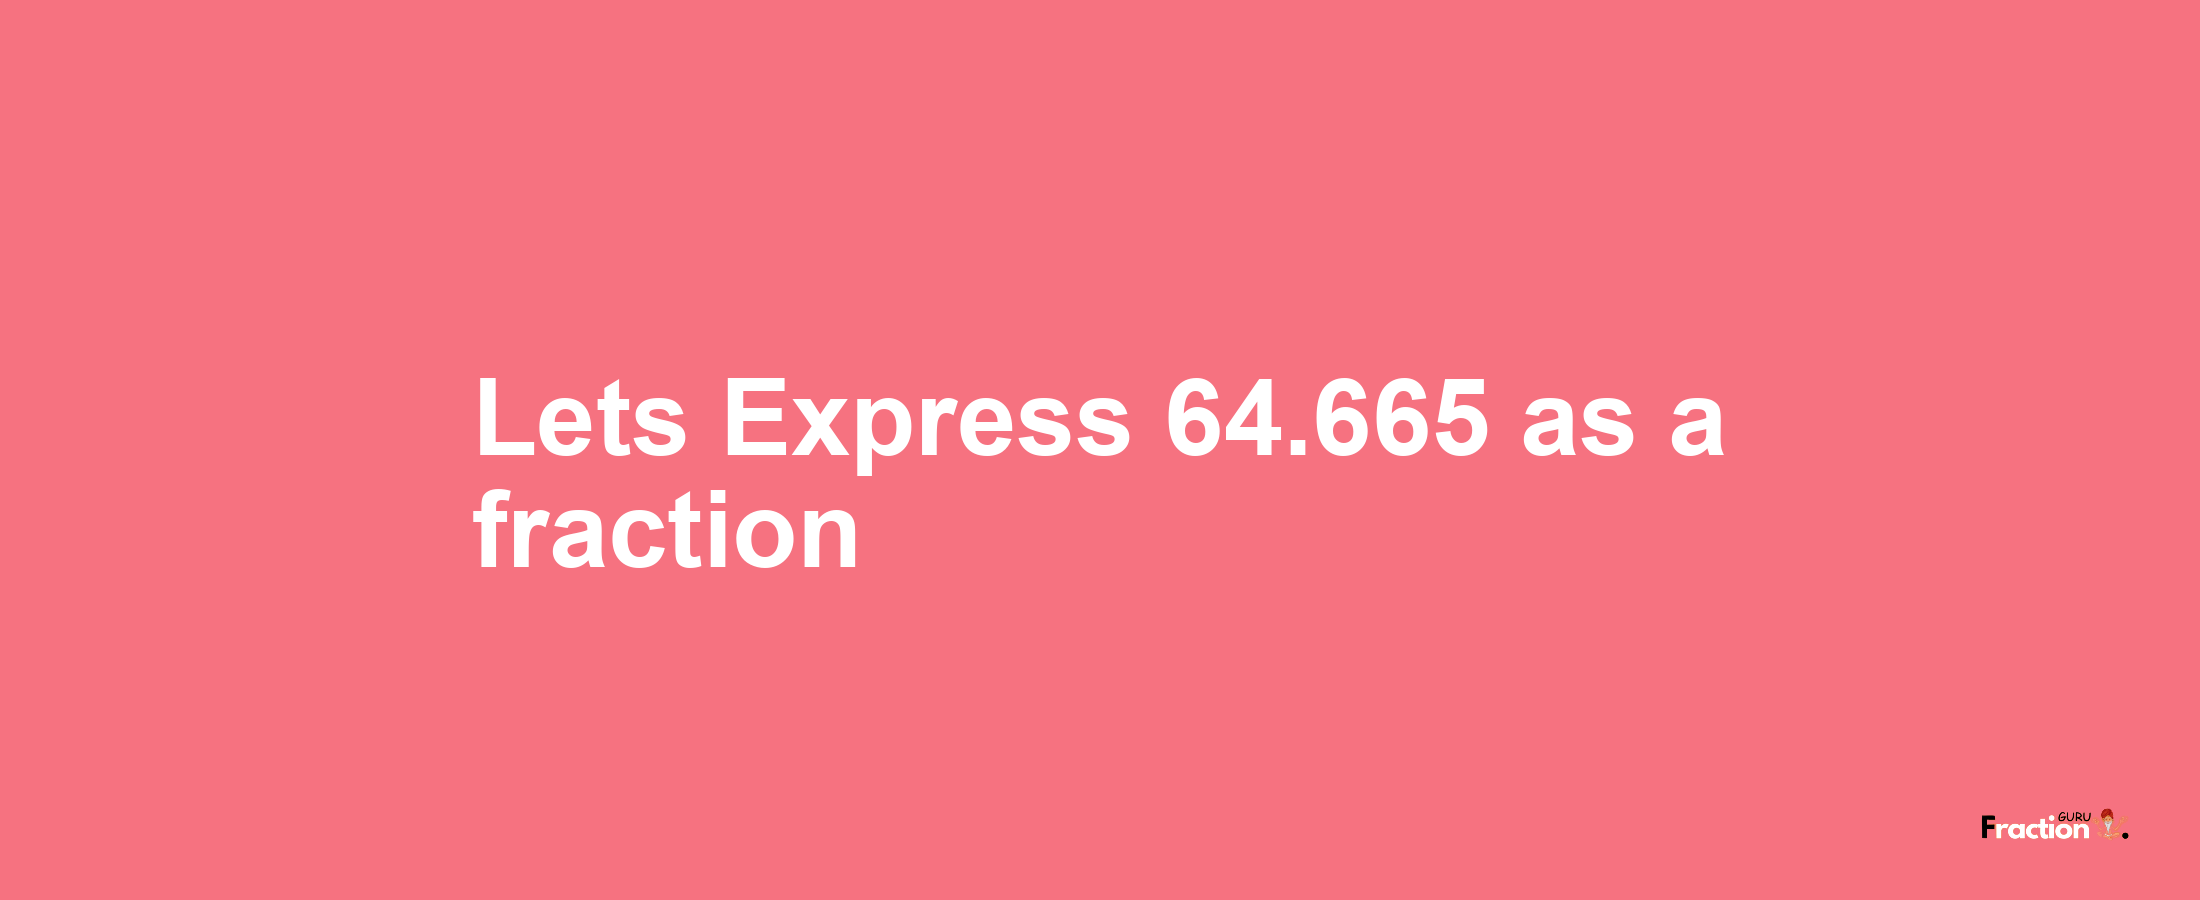 Lets Express 64.665 as afraction